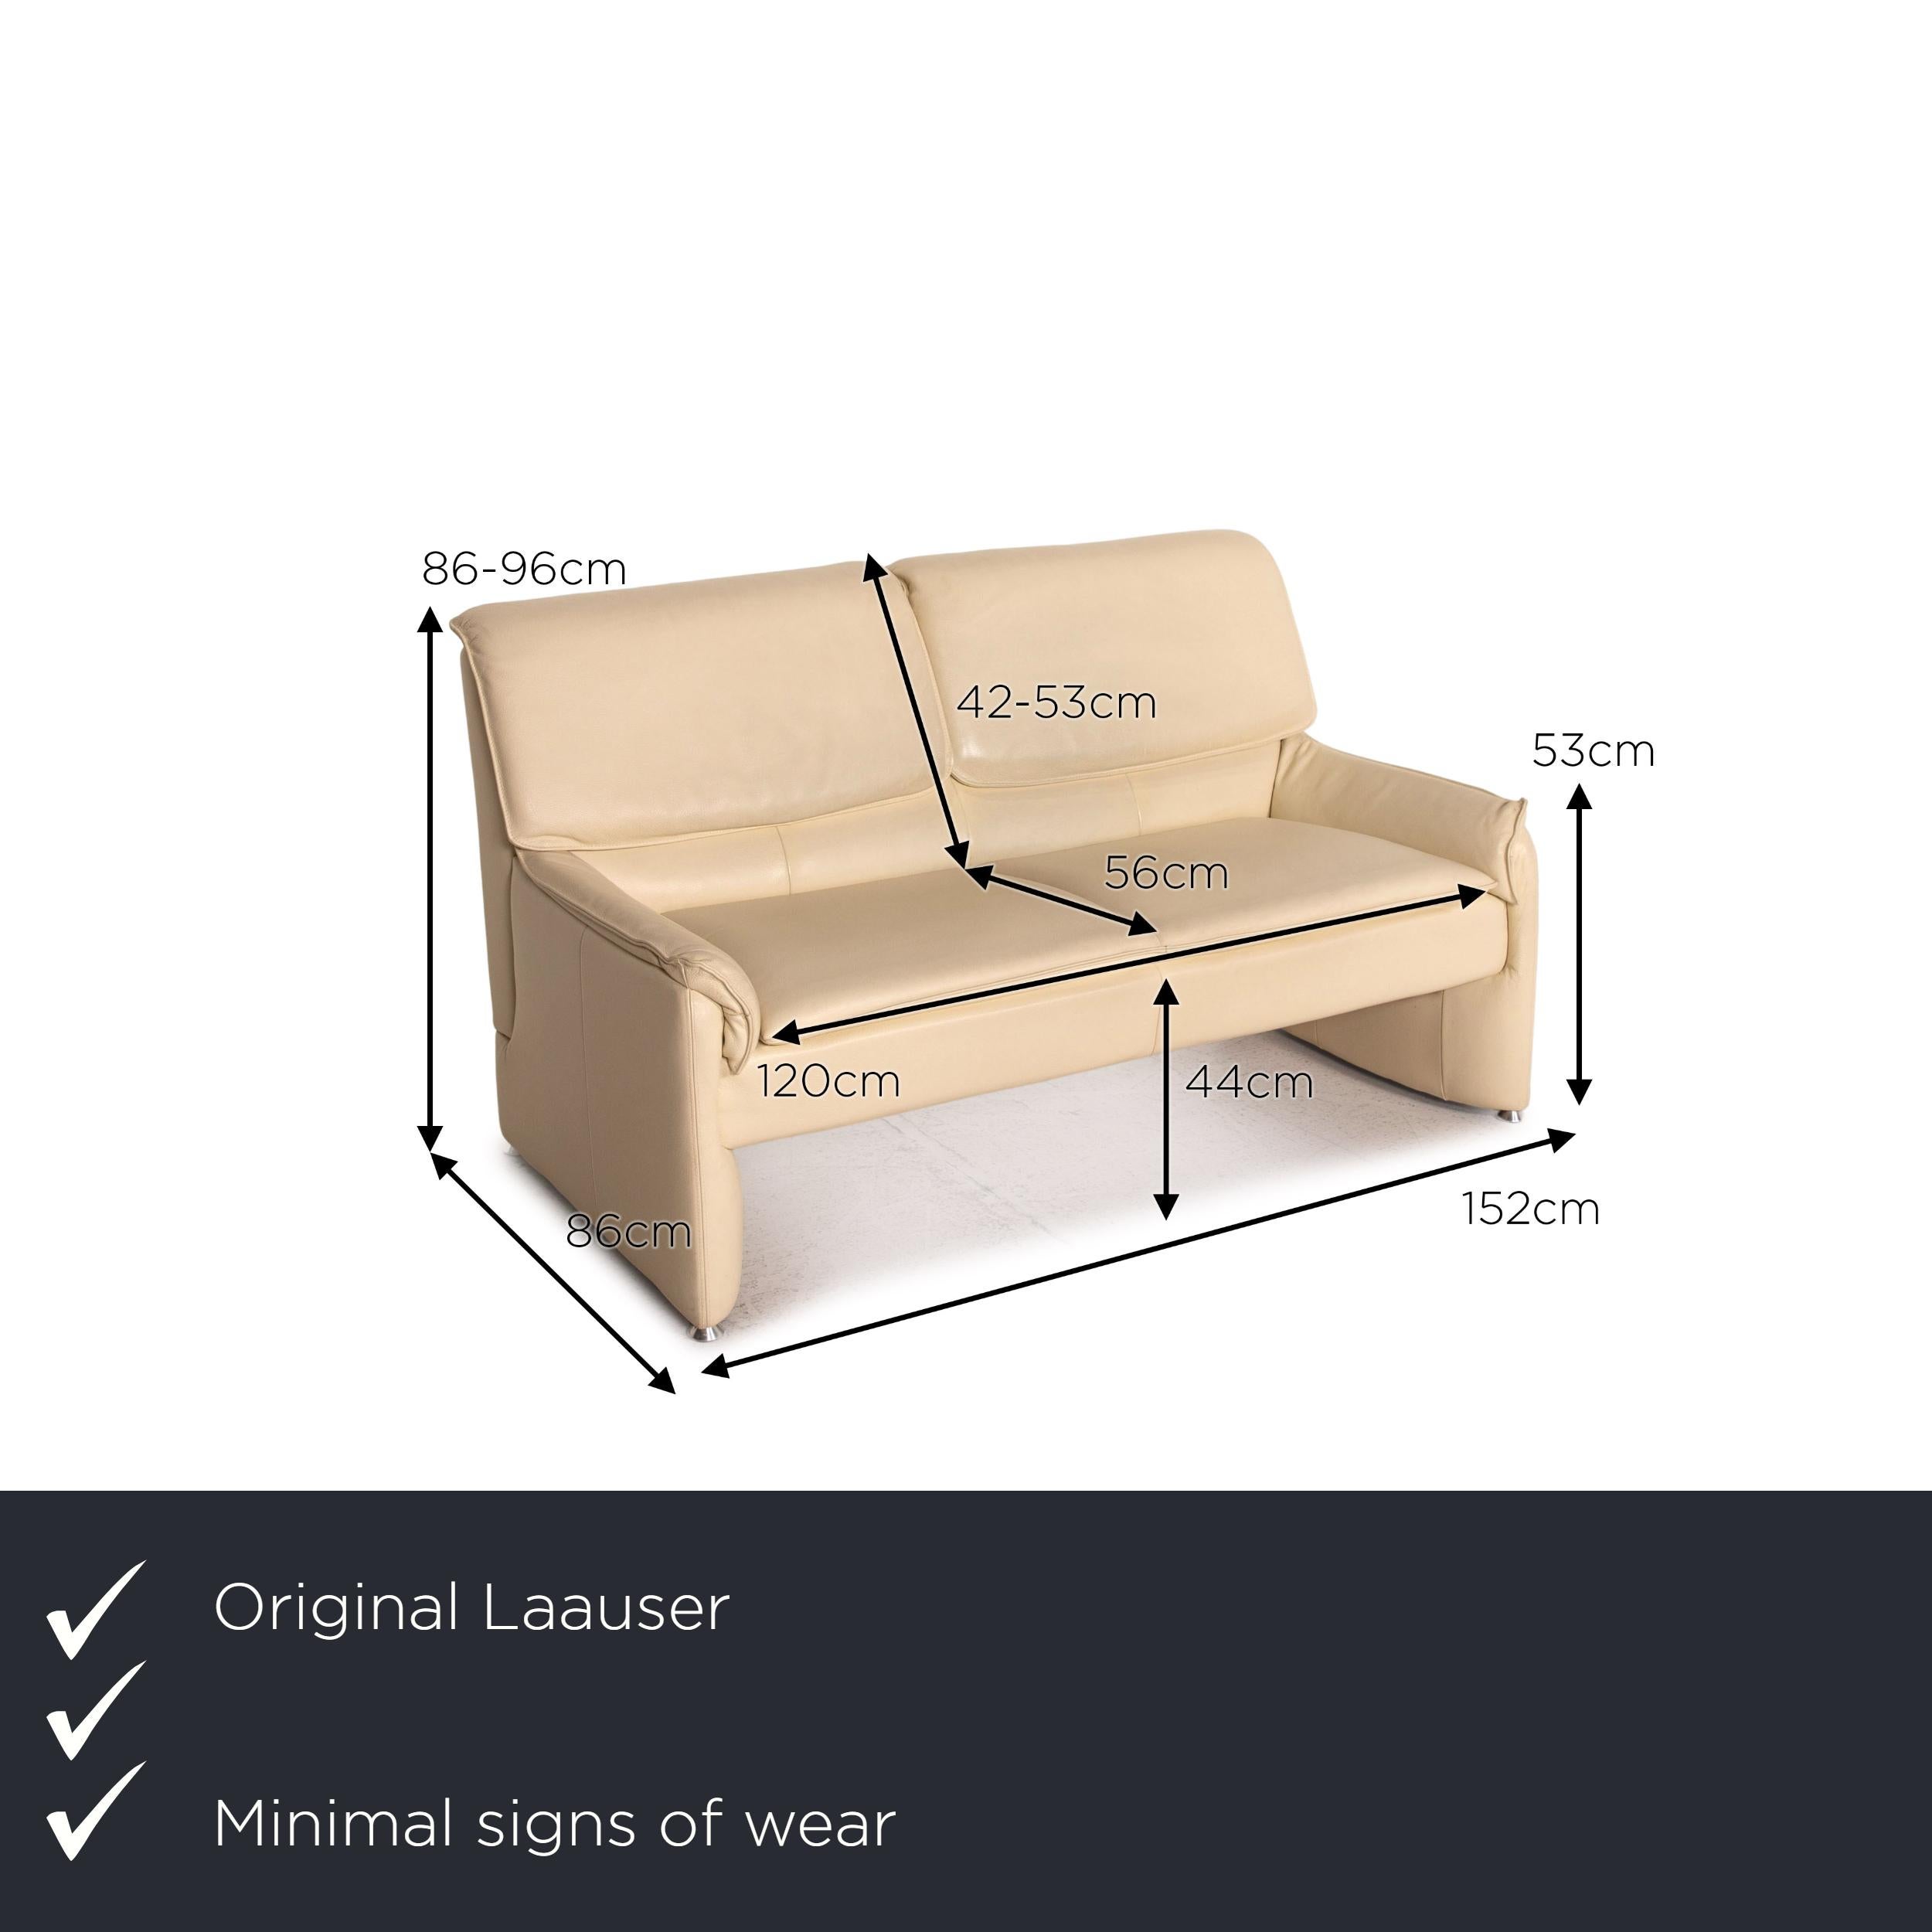 We present to you a Laauser leather sofa cream two-seater function couch.
 

 Product measurements in centimeters:
 

Depth: 86
Width: 152
Height: 86
Seat height: 44
Rest height: 53
Seat depth: 56
Seat width: 120
Back height: 42.
 